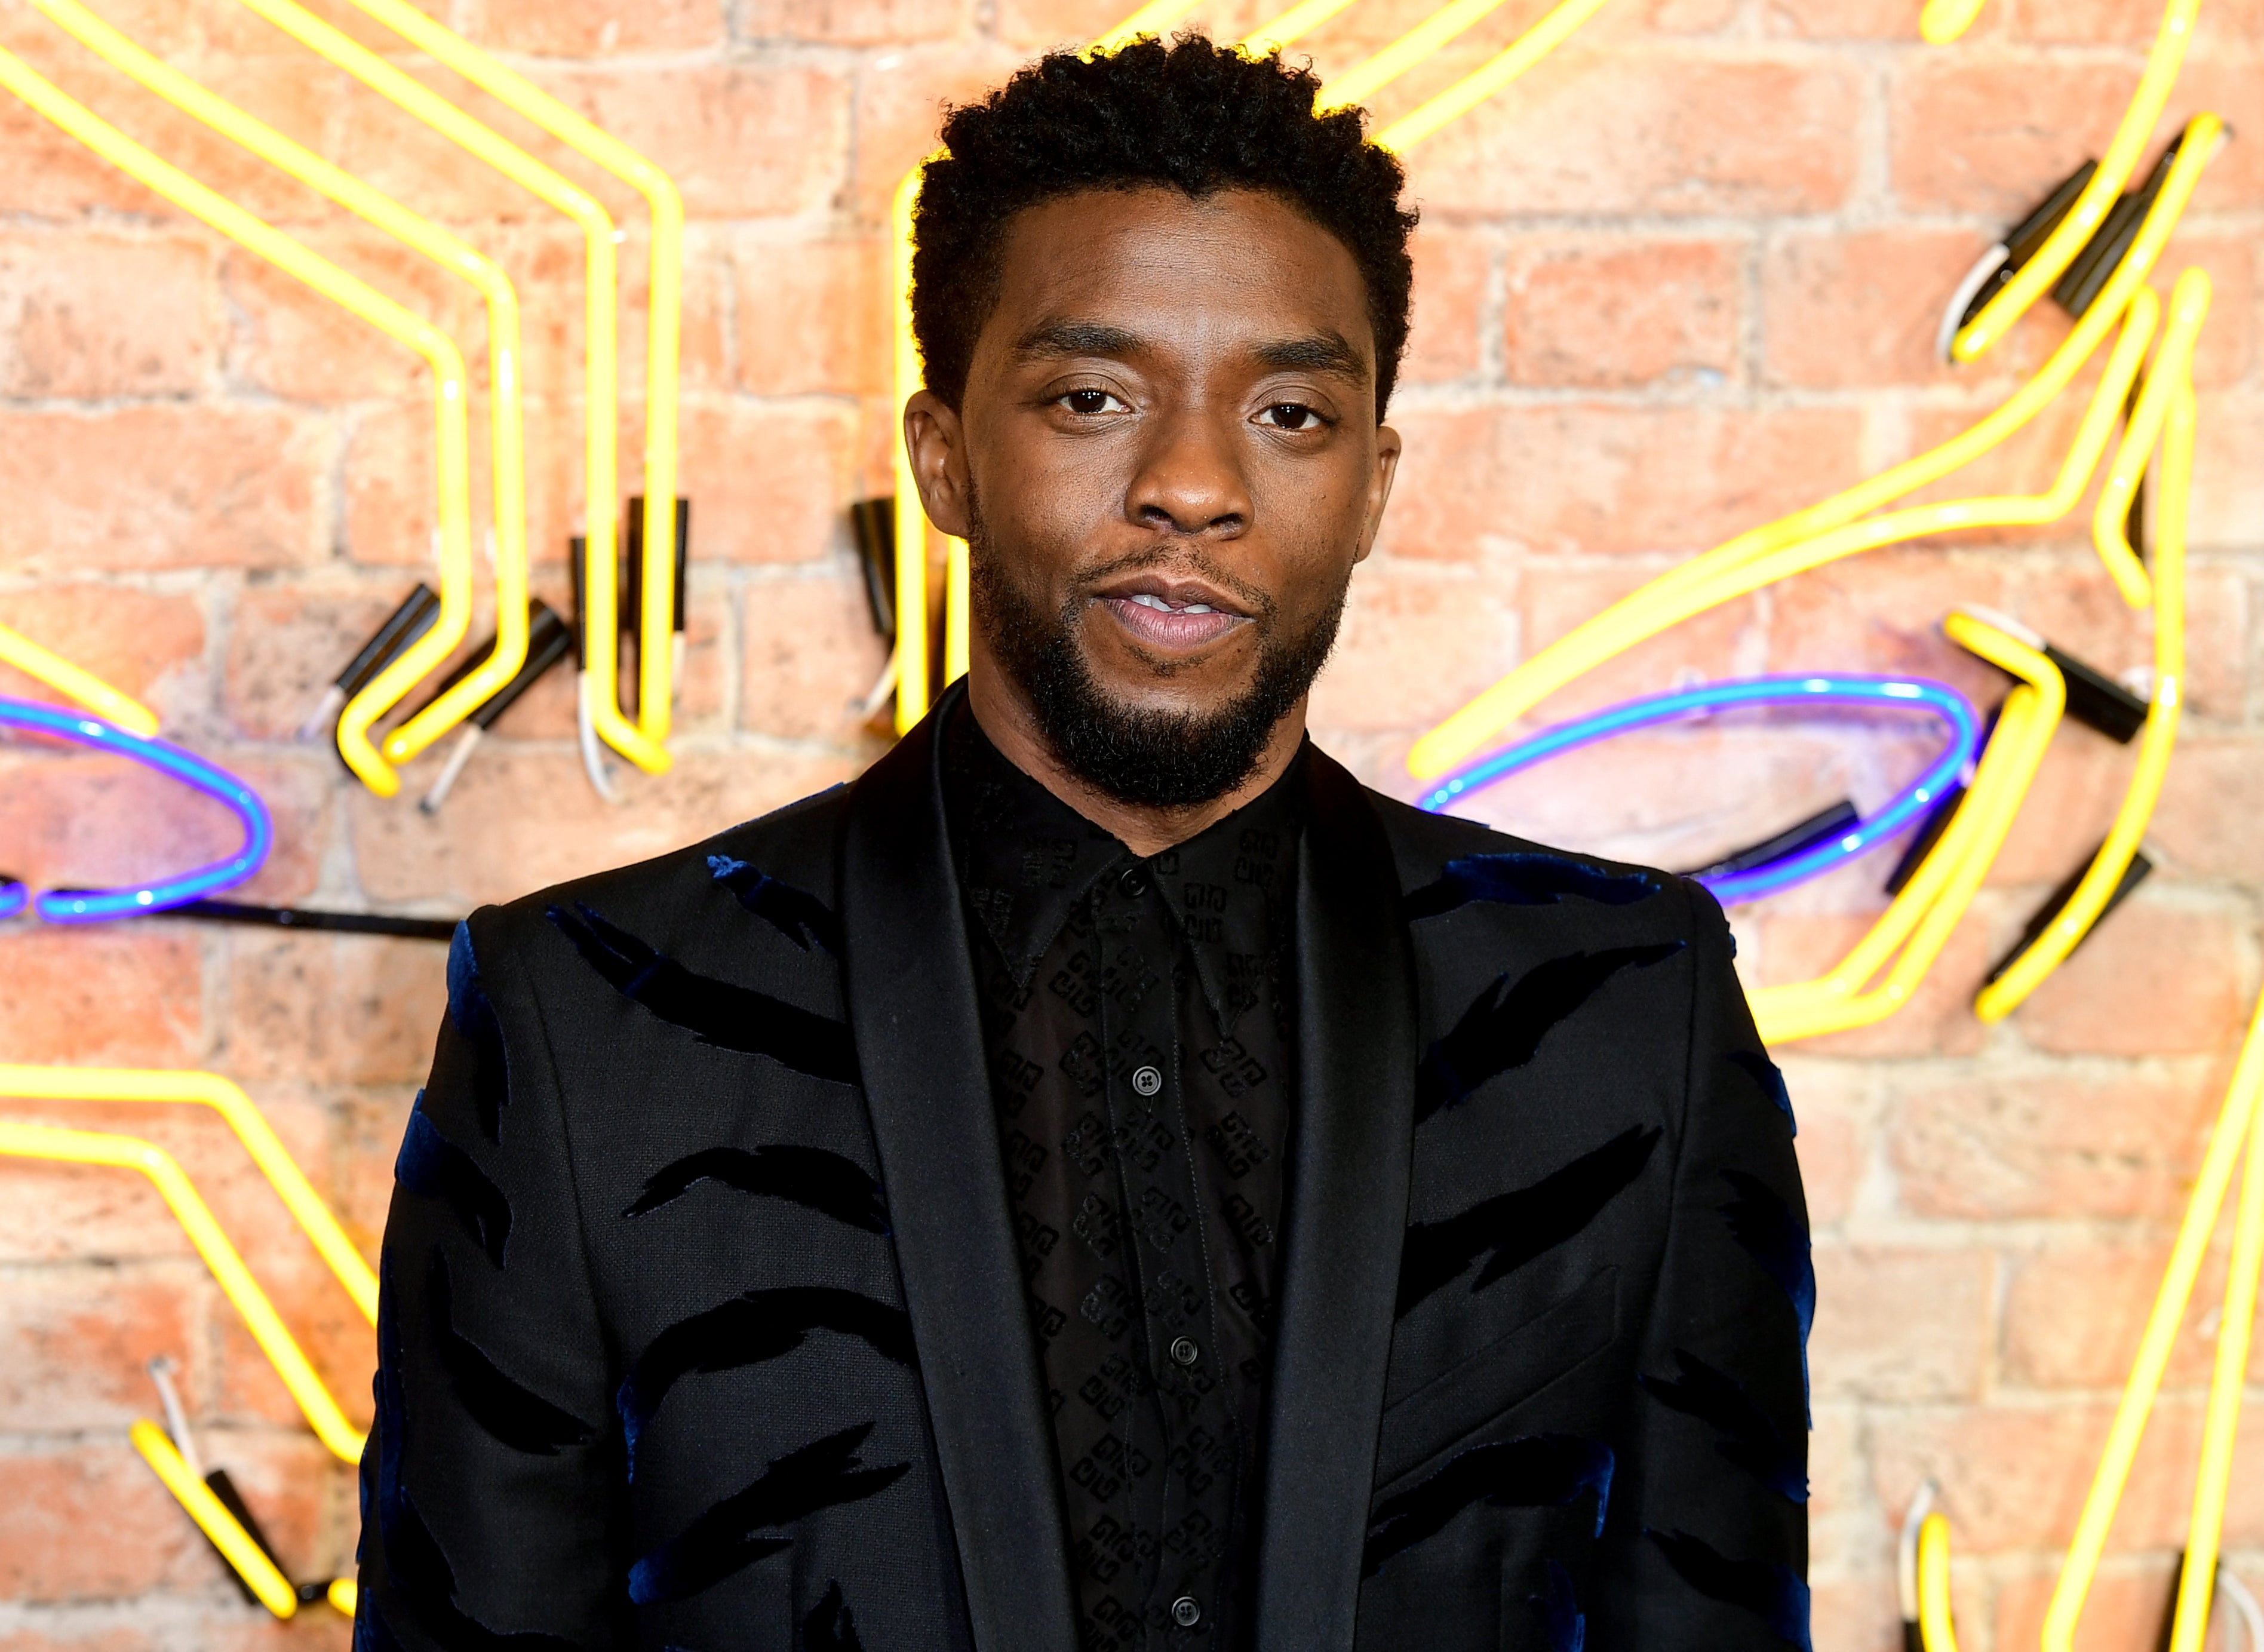 Chadwick Boseman died from colon cancer in 2020, aged 43 (Ian West/PA)